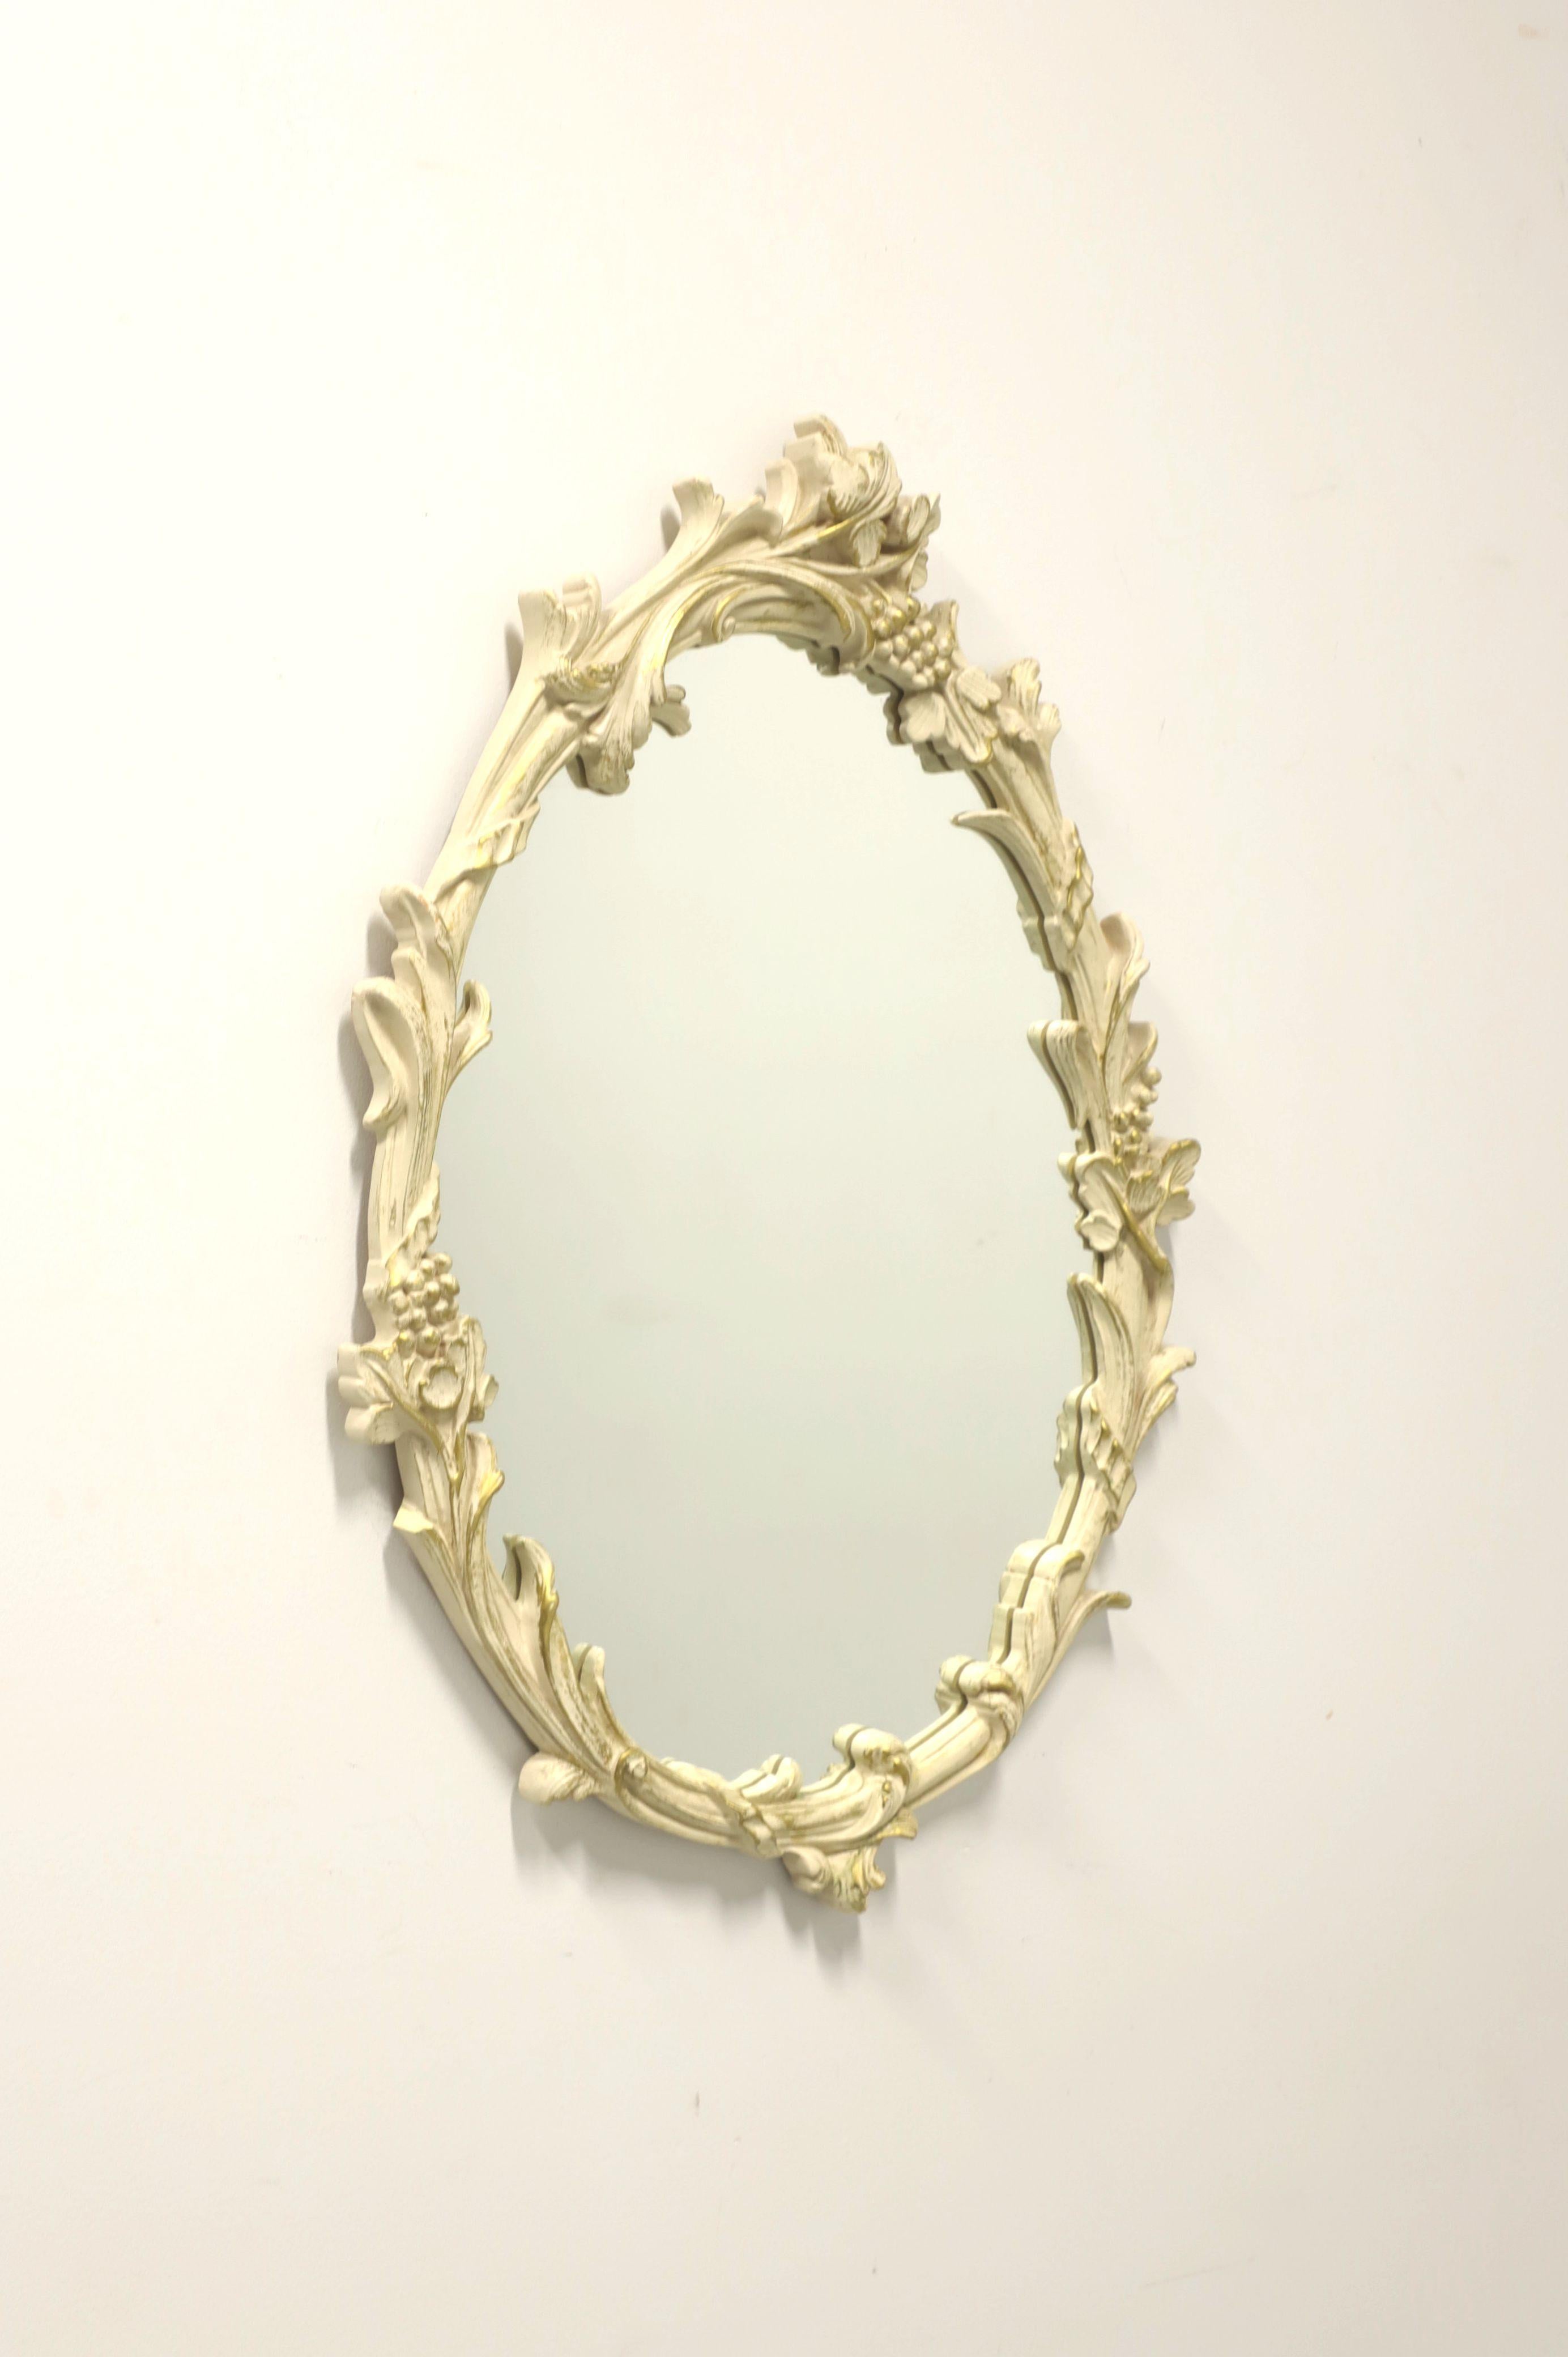 A French style wall mirror by Carolina Mirror. Mirrored glass and solid wood frame painted antique white. Features ornately carved frame with a floral motif. Made in North Carolina, USA, in the late 20th Century. 

Measures: 22.75 W 1.5 D 34.25 H,